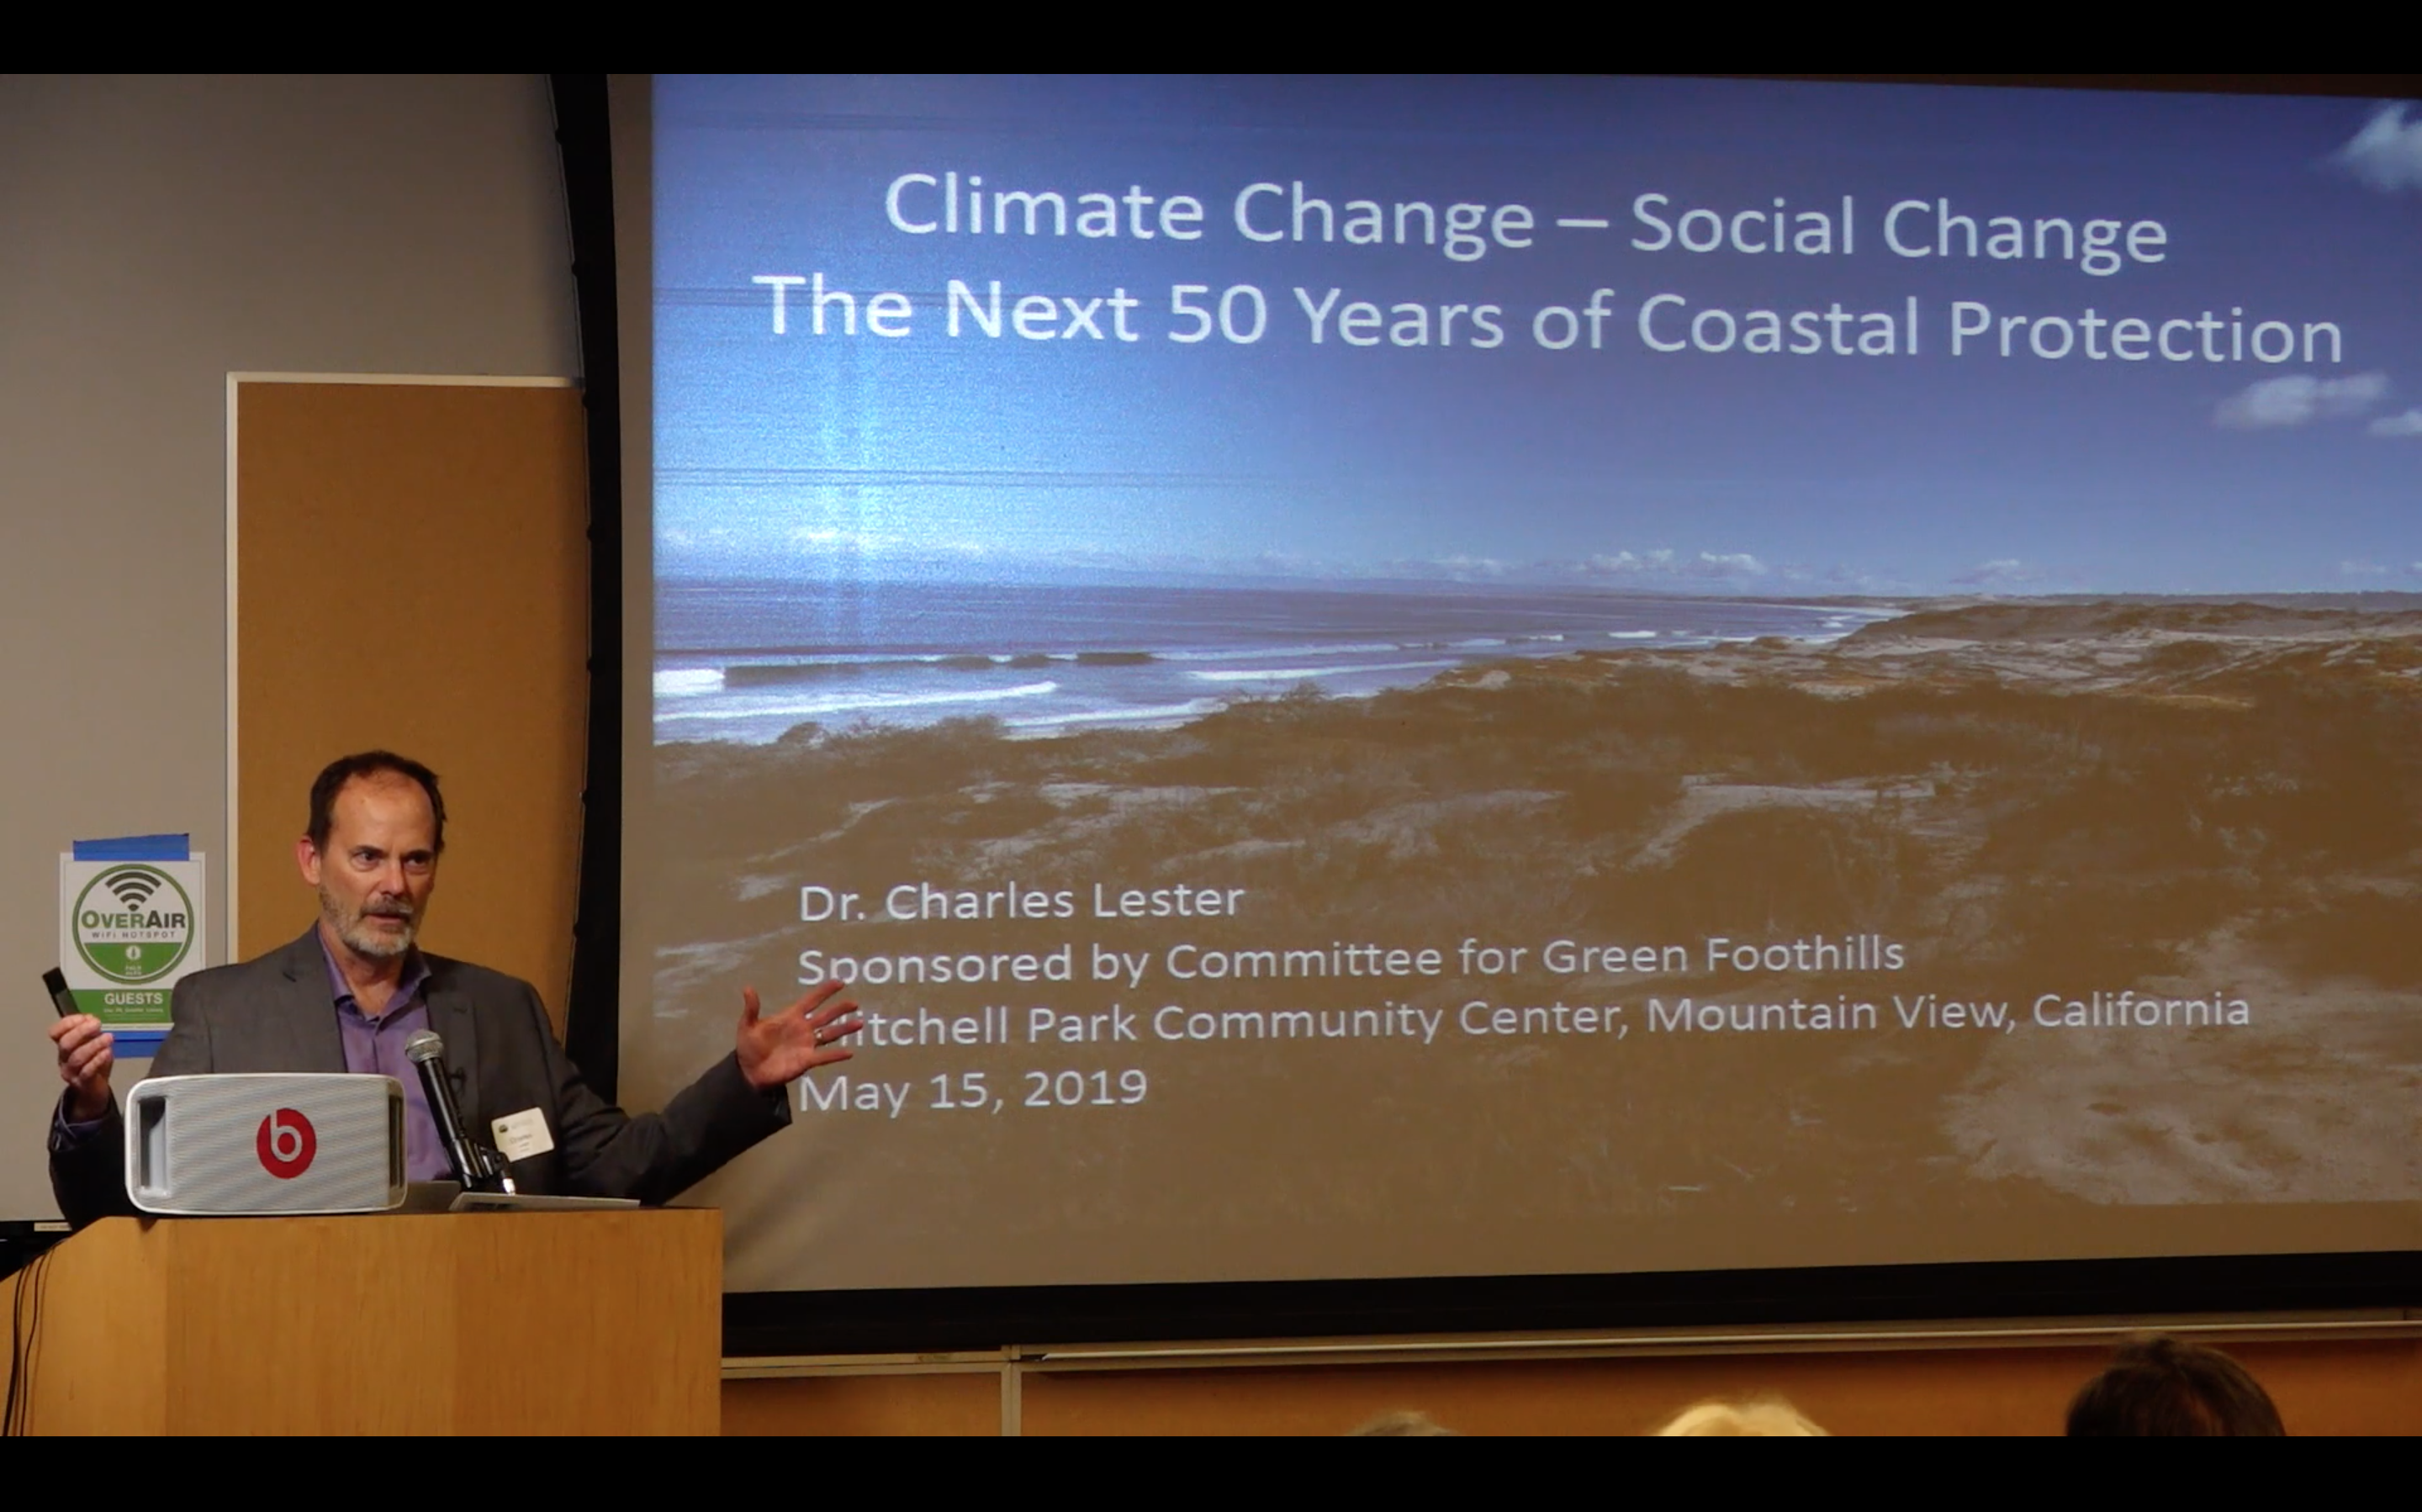 Watch Charles Lester’s Climate Change Presentation